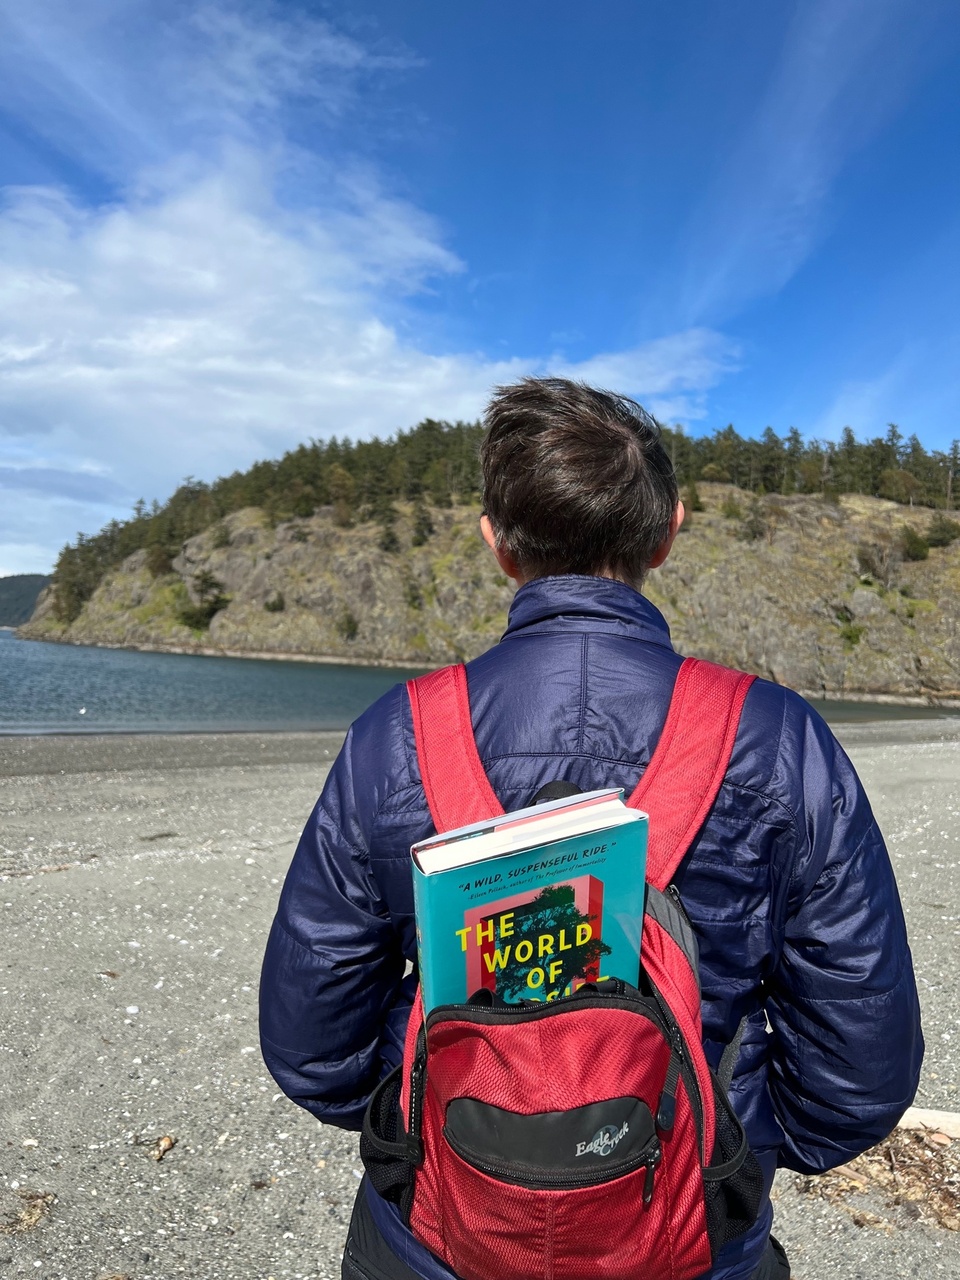 The World of Pondside book is peeking out of the backpack of a woman hiking near the ocean